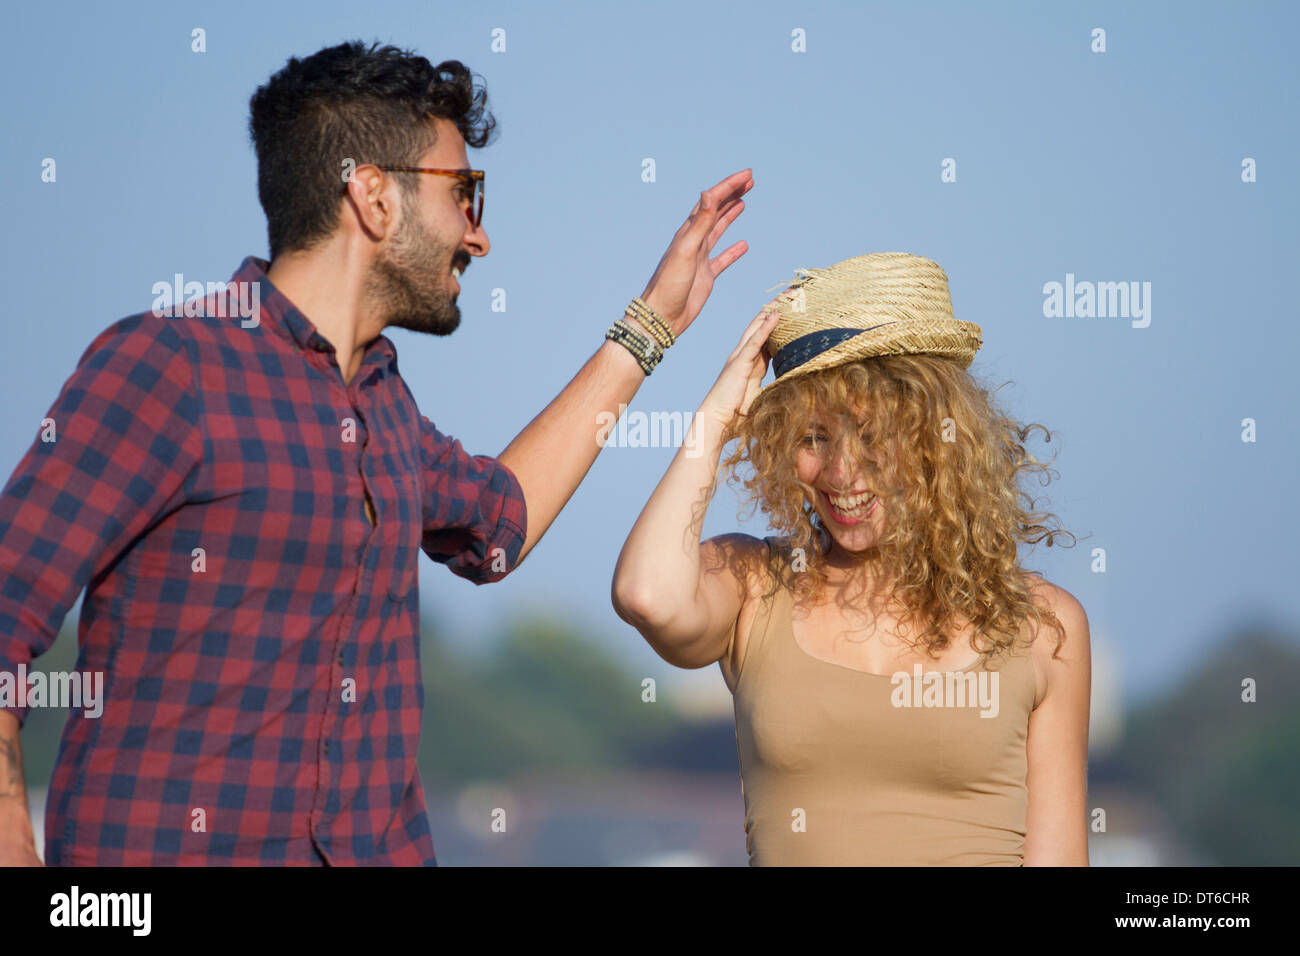 Young couple laughing, woman wearing hat Stock Photo